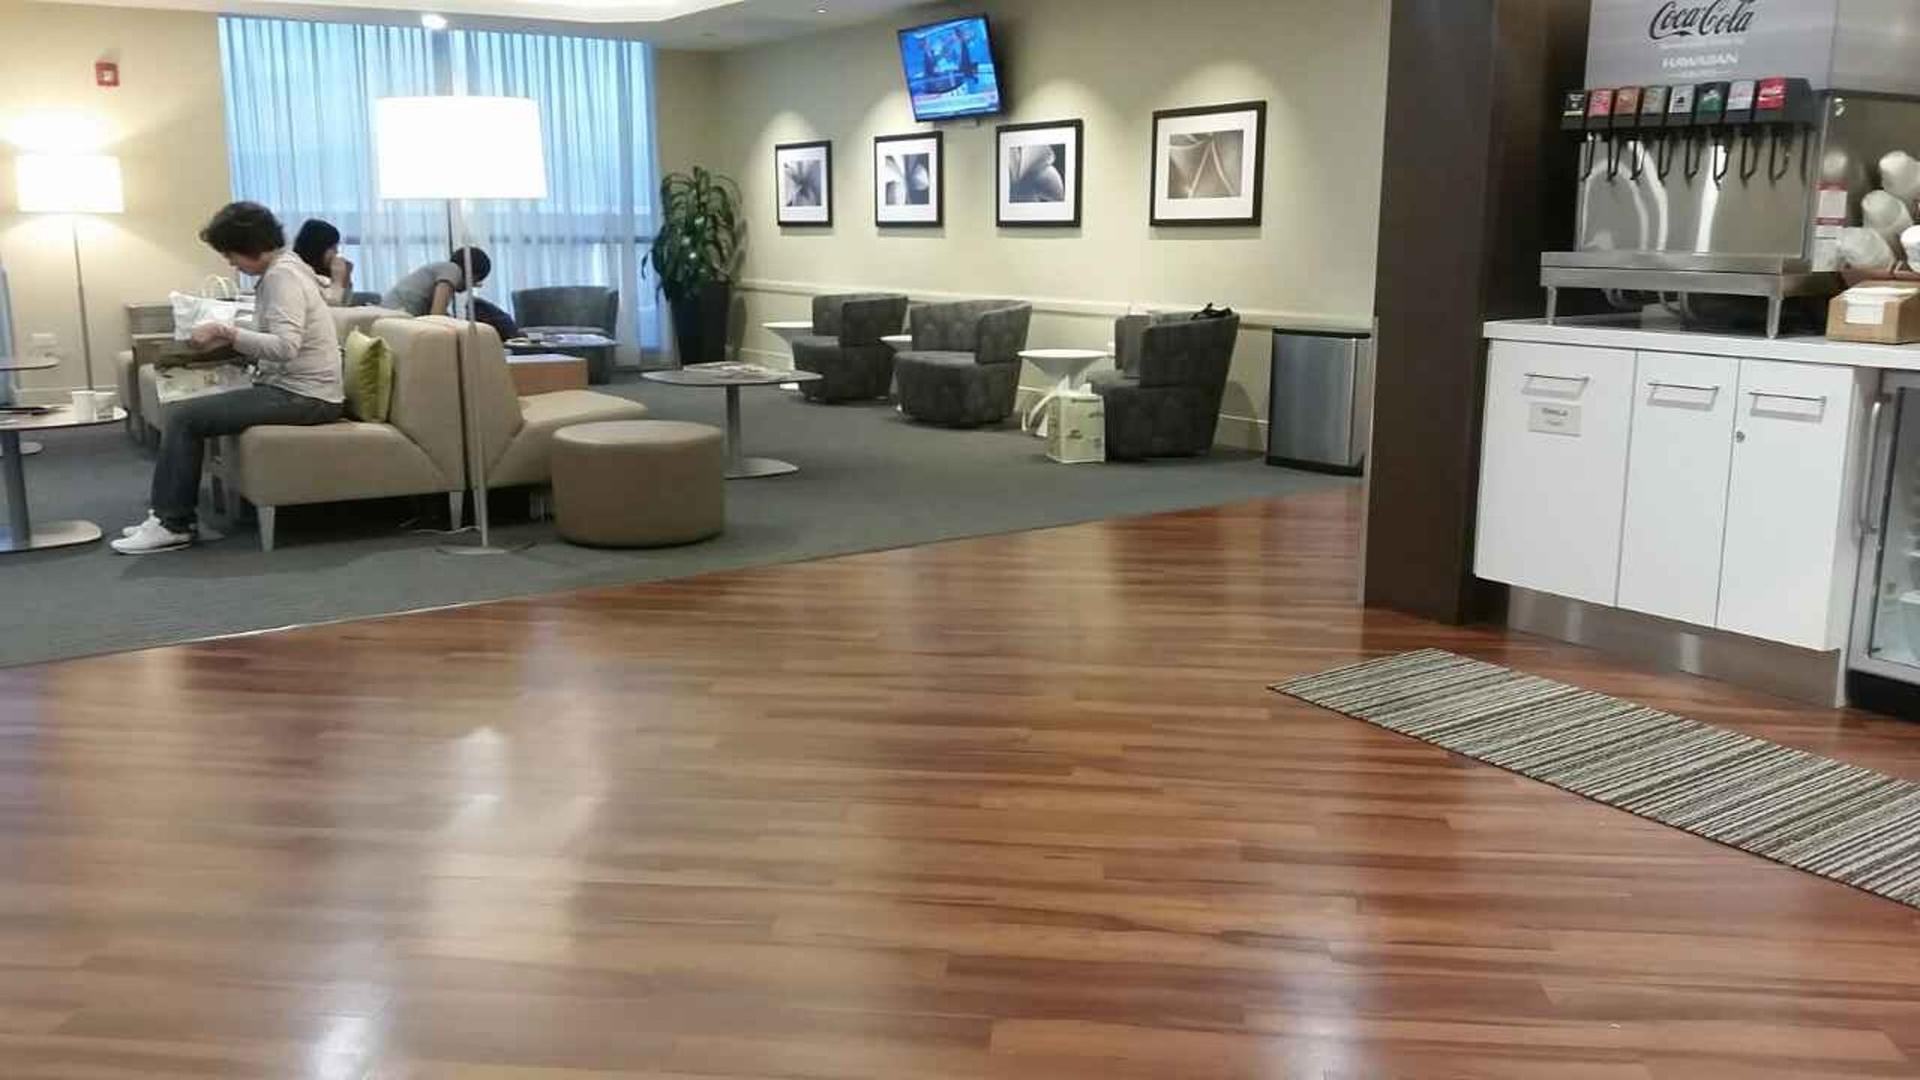 Hawaiian Airlines The Plumeria Lounge image 20 of 41